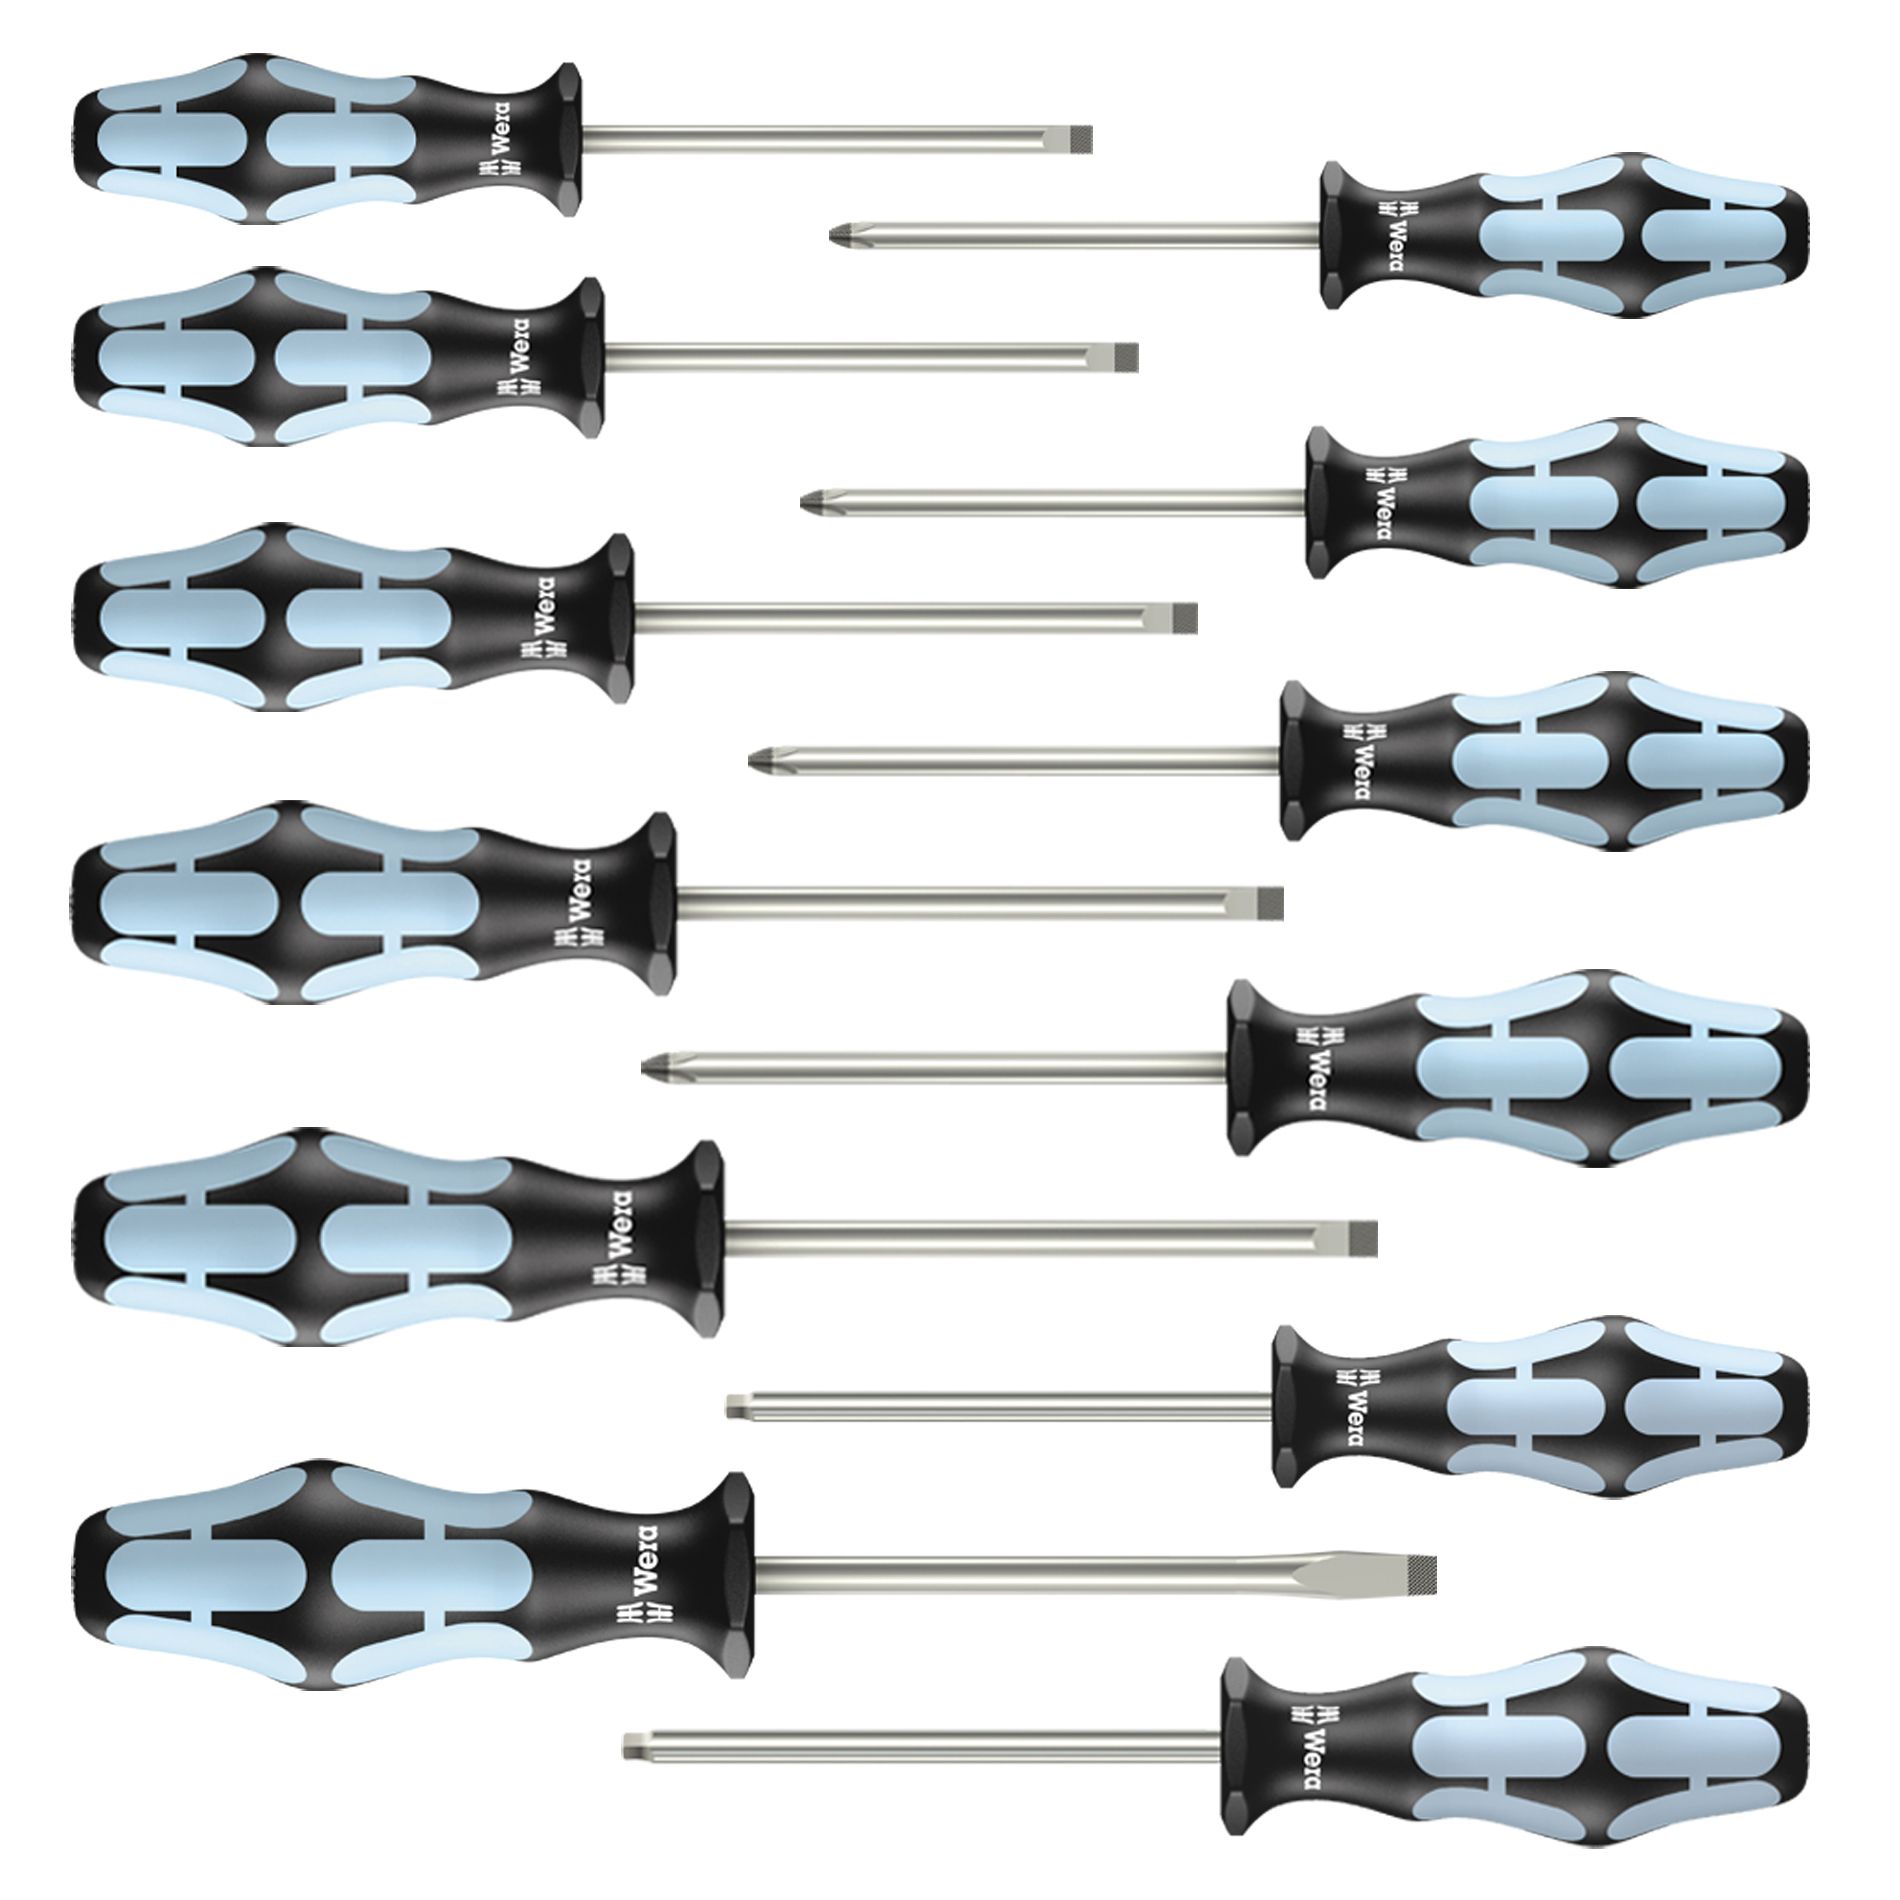 Wera 12 pc. Stainless Steel Screwdriver Set with Laser Tip